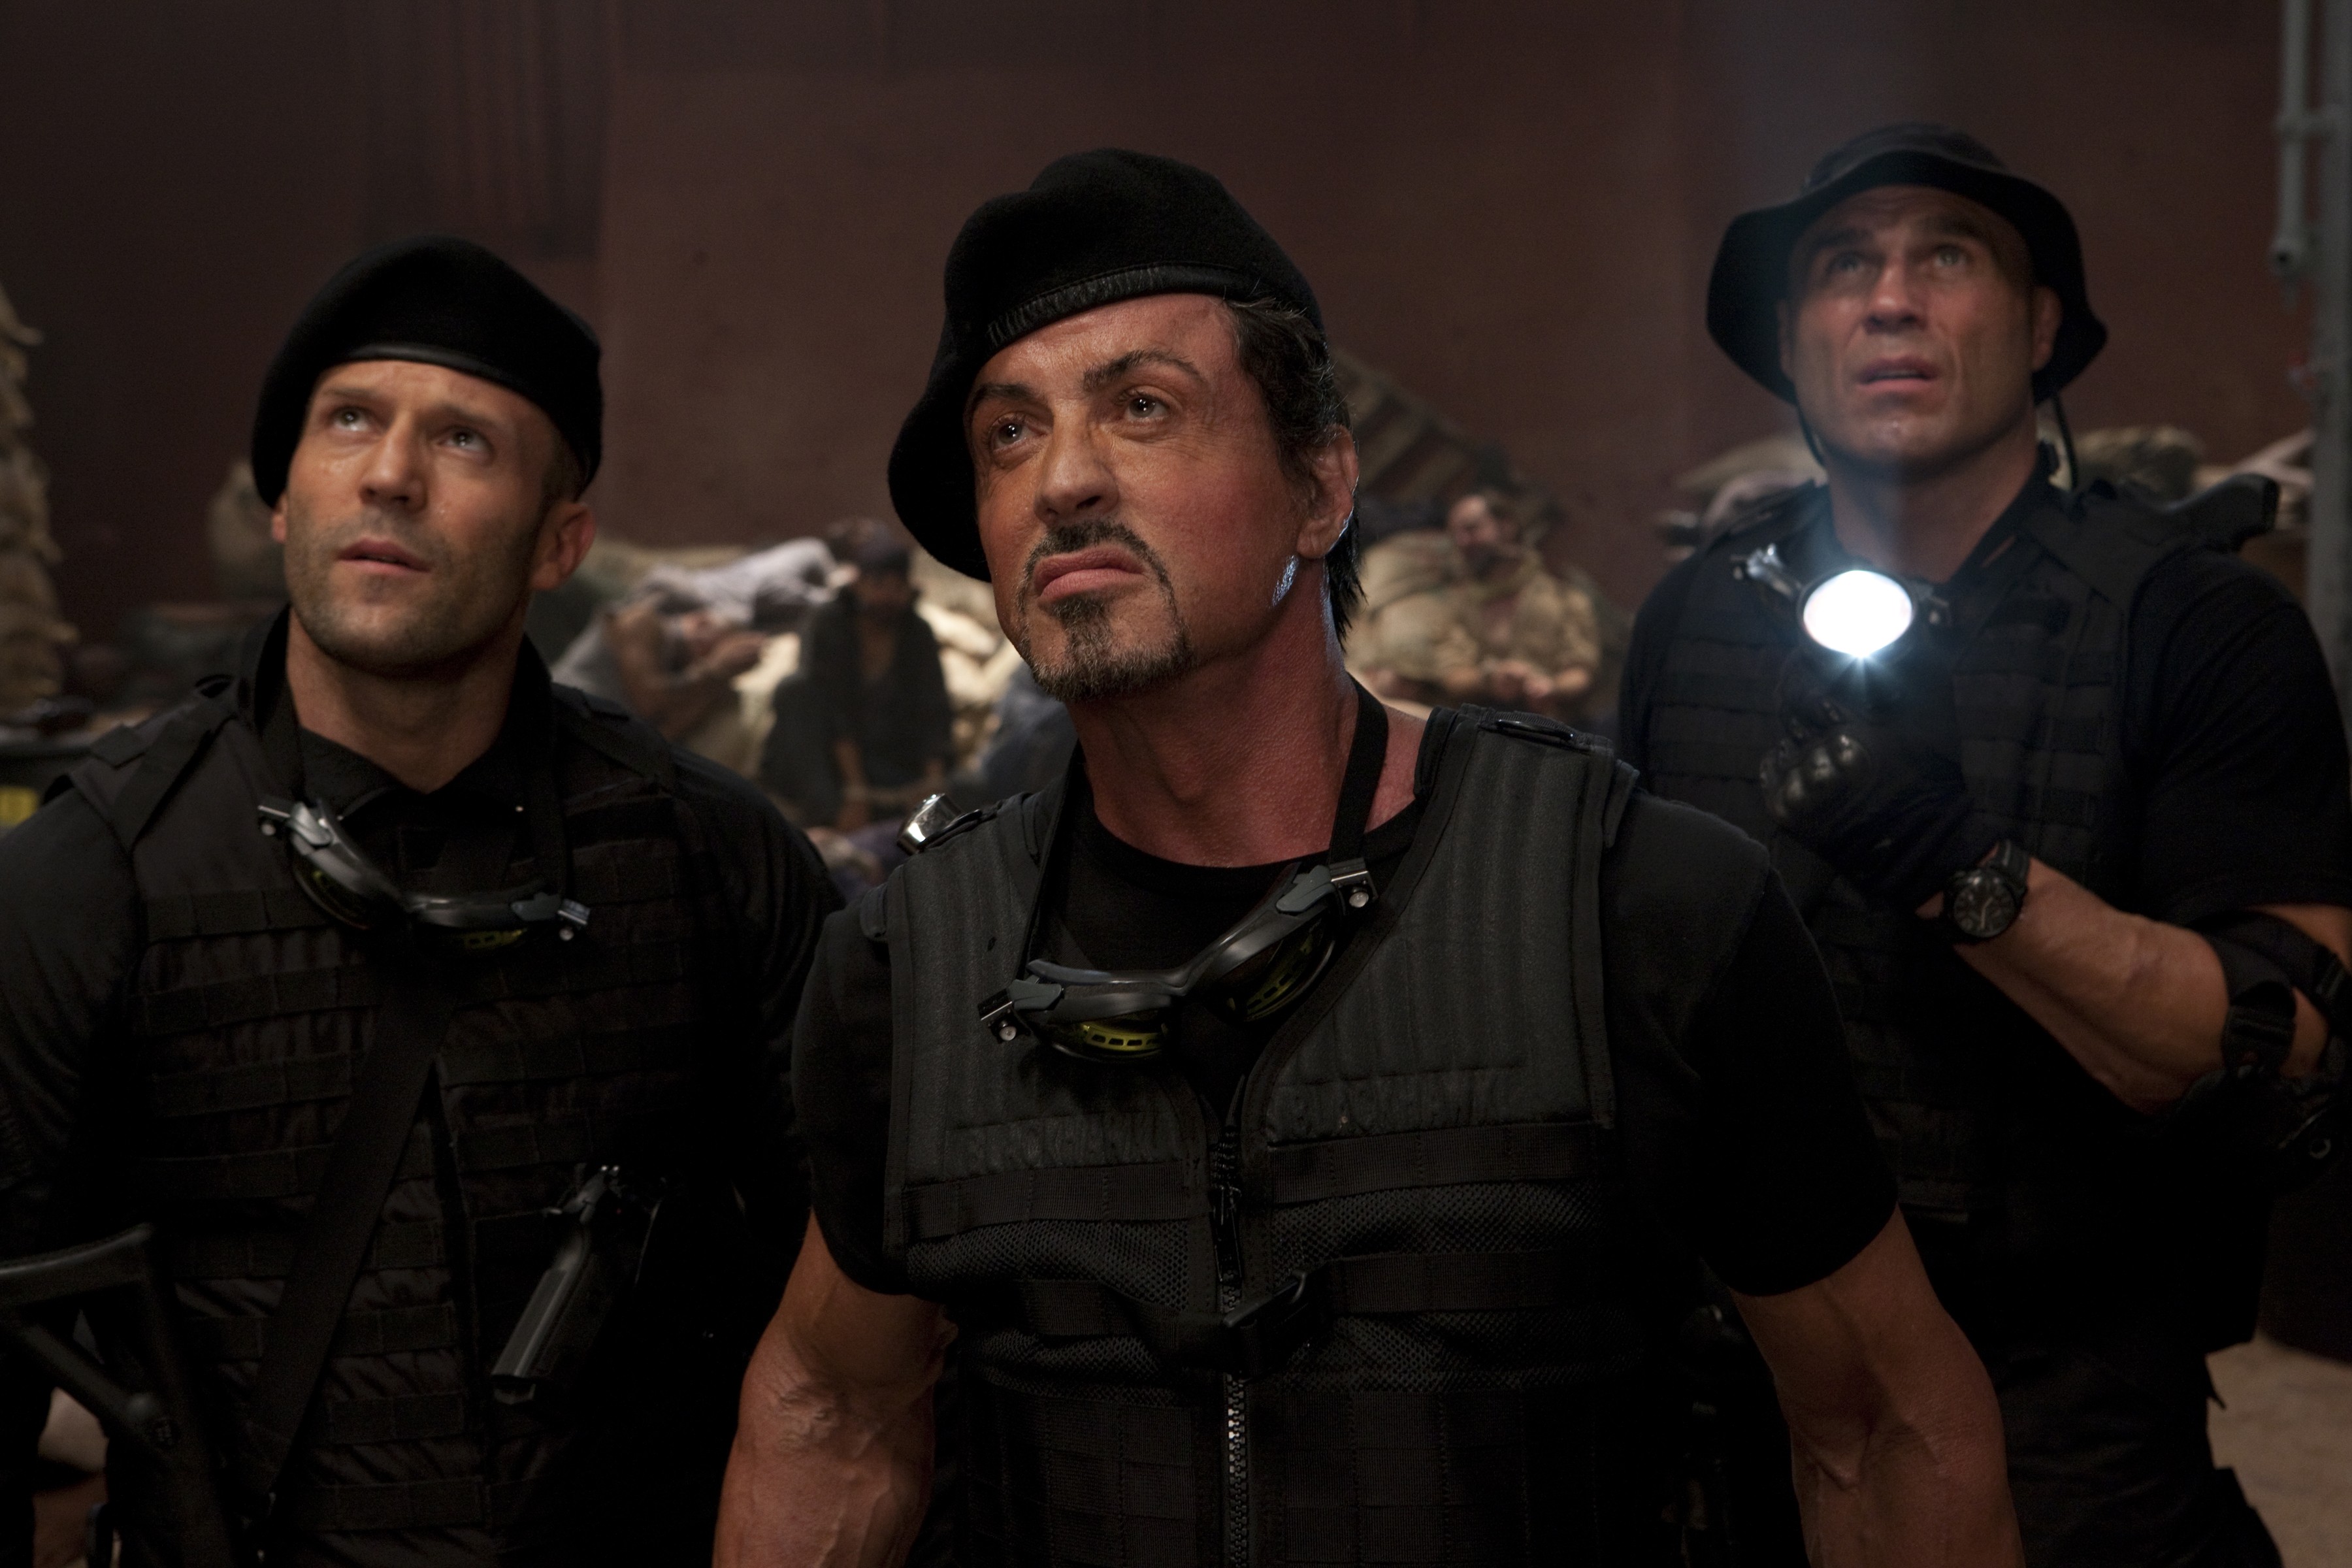 The Expendables, UFC, Sylvester Stallone, Randy Couture, Dolph Lundgren